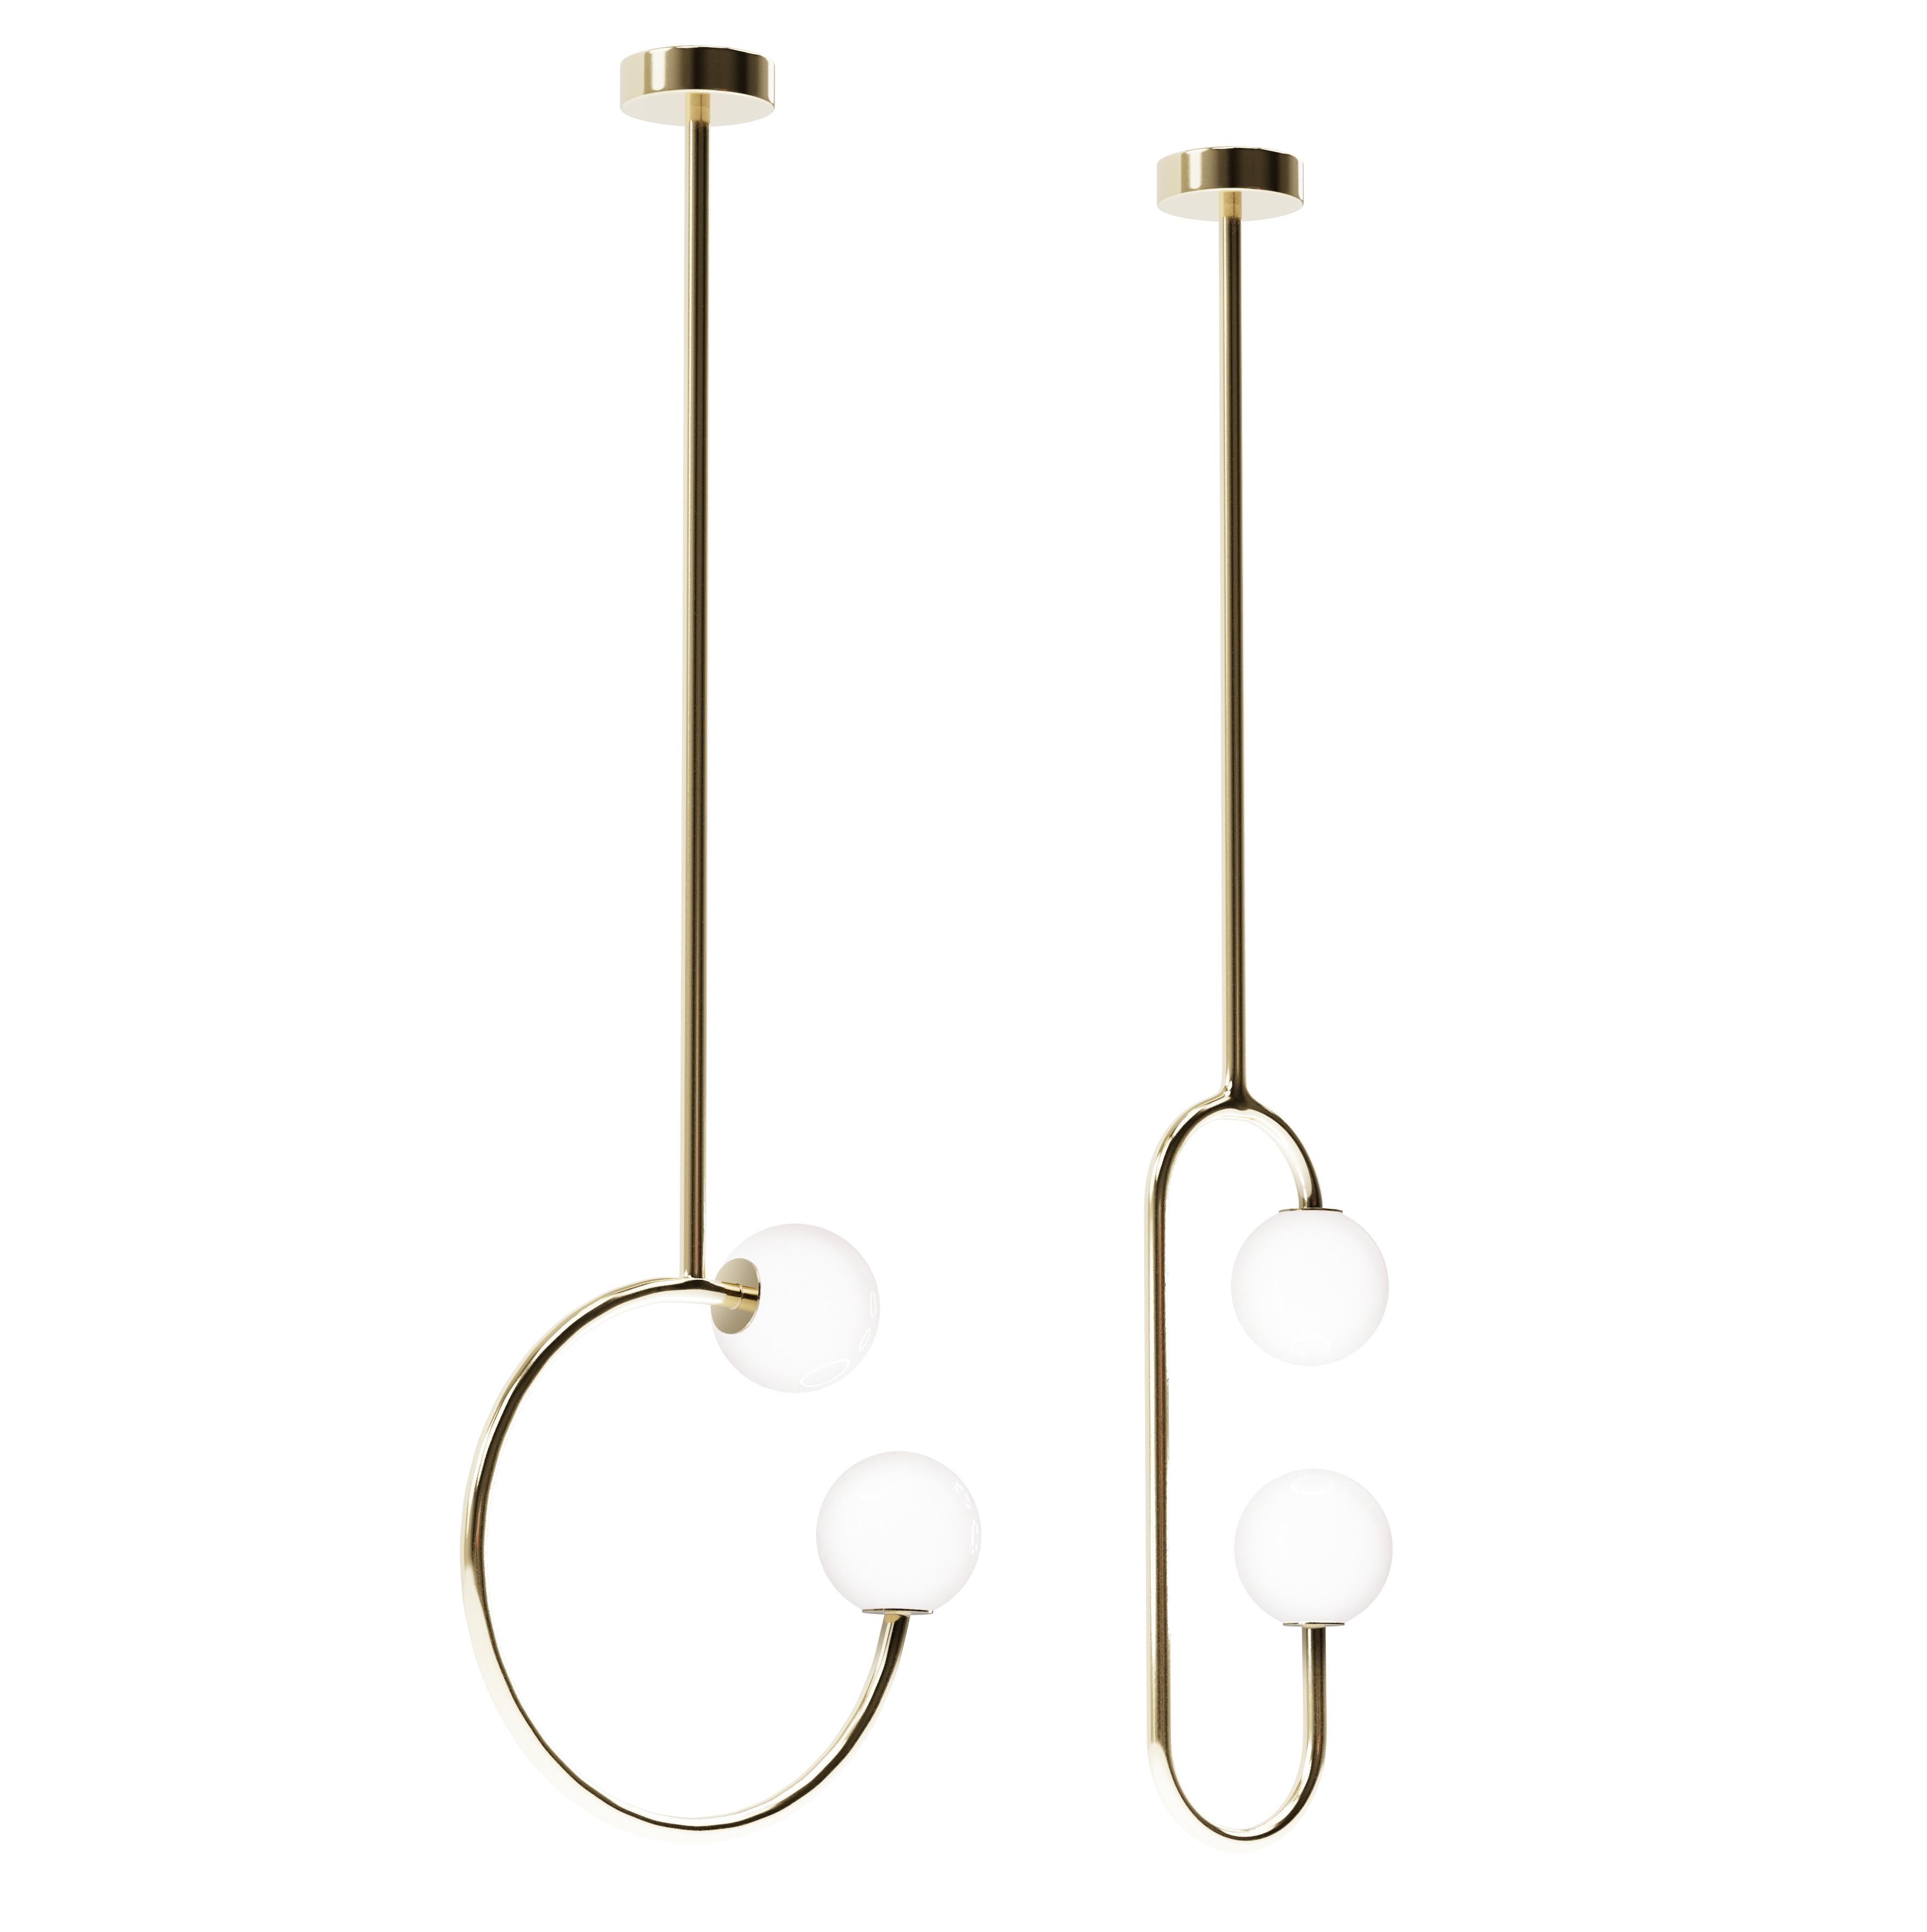 Gabriela and Olivia pair of brass ceiling lamps, Royal Stranger

Dimensions Gabriela
Width: 40cm Height: Adjustable Depth: 11cm
Dimensions Olivia
Width: 20cm Height: Adjustable Depth: 11cm

Inspired by the femininity and using bold and